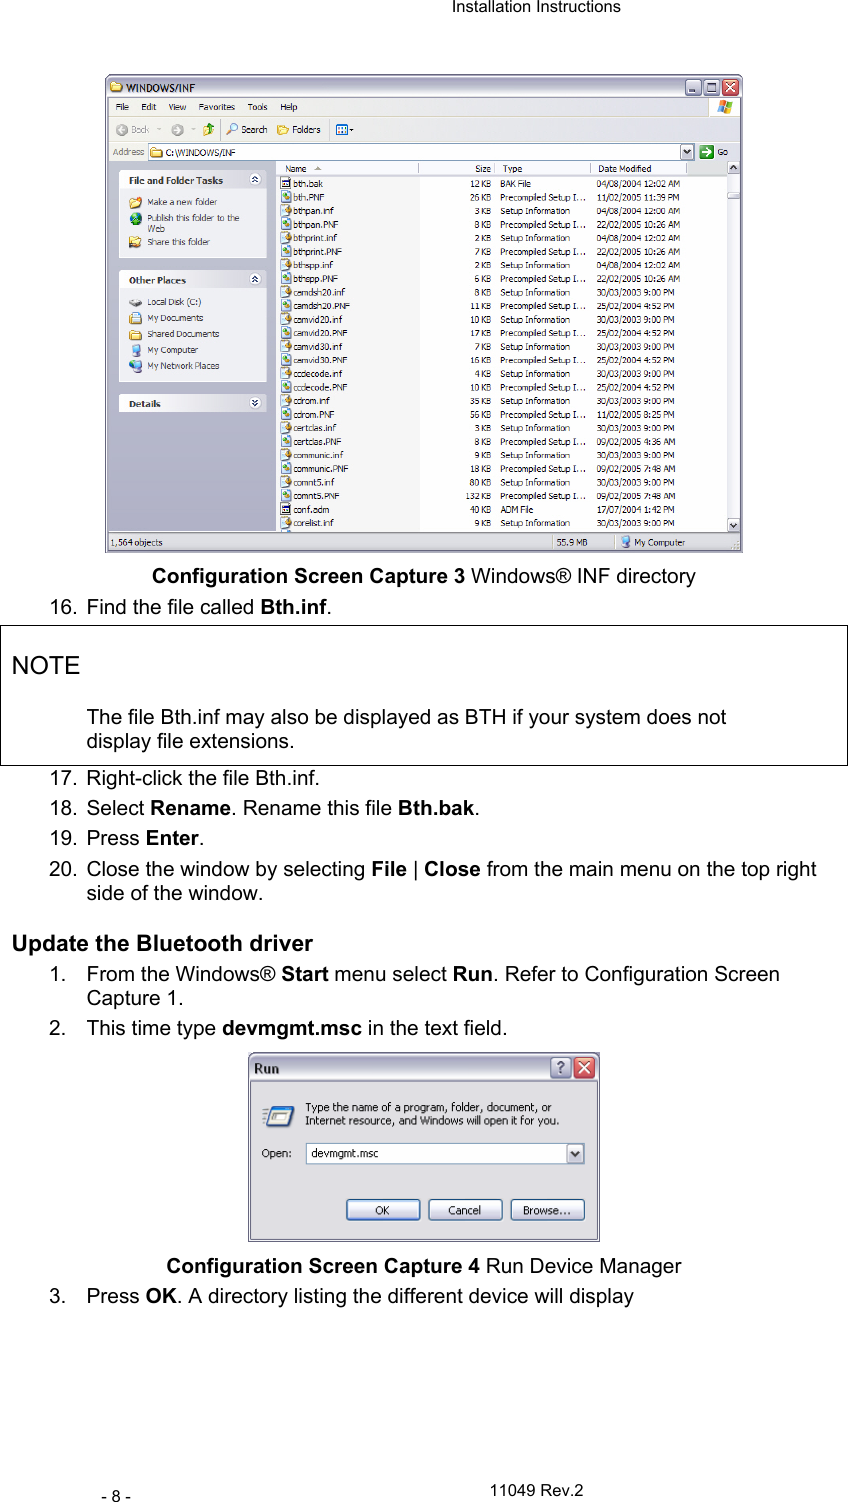  Installation Instructions   11049 Rev.2 - 8 -  Configuration Screen Capture 3 Windows® INF directory 16.  Find the file called Bth.inf. NOTE The file Bth.inf may also be displayed as BTH if your system does not display file extensions. 17.  Right-click the file Bth.inf.  18. Select Rename. Rename this file Bth.bak.  19. Press Enter. 20.  Close the window by selecting File | Close from the main menu on the top right side of the window.  Update the Bluetooth driver  1. From the Windows® Start menu select Run. Refer to Configuration Screen Capture 1. 2.  This time type devmgmt.msc in the text field.  Configuration Screen Capture 4 Run Device Manager 3. Press OK. A directory listing the different device will display 